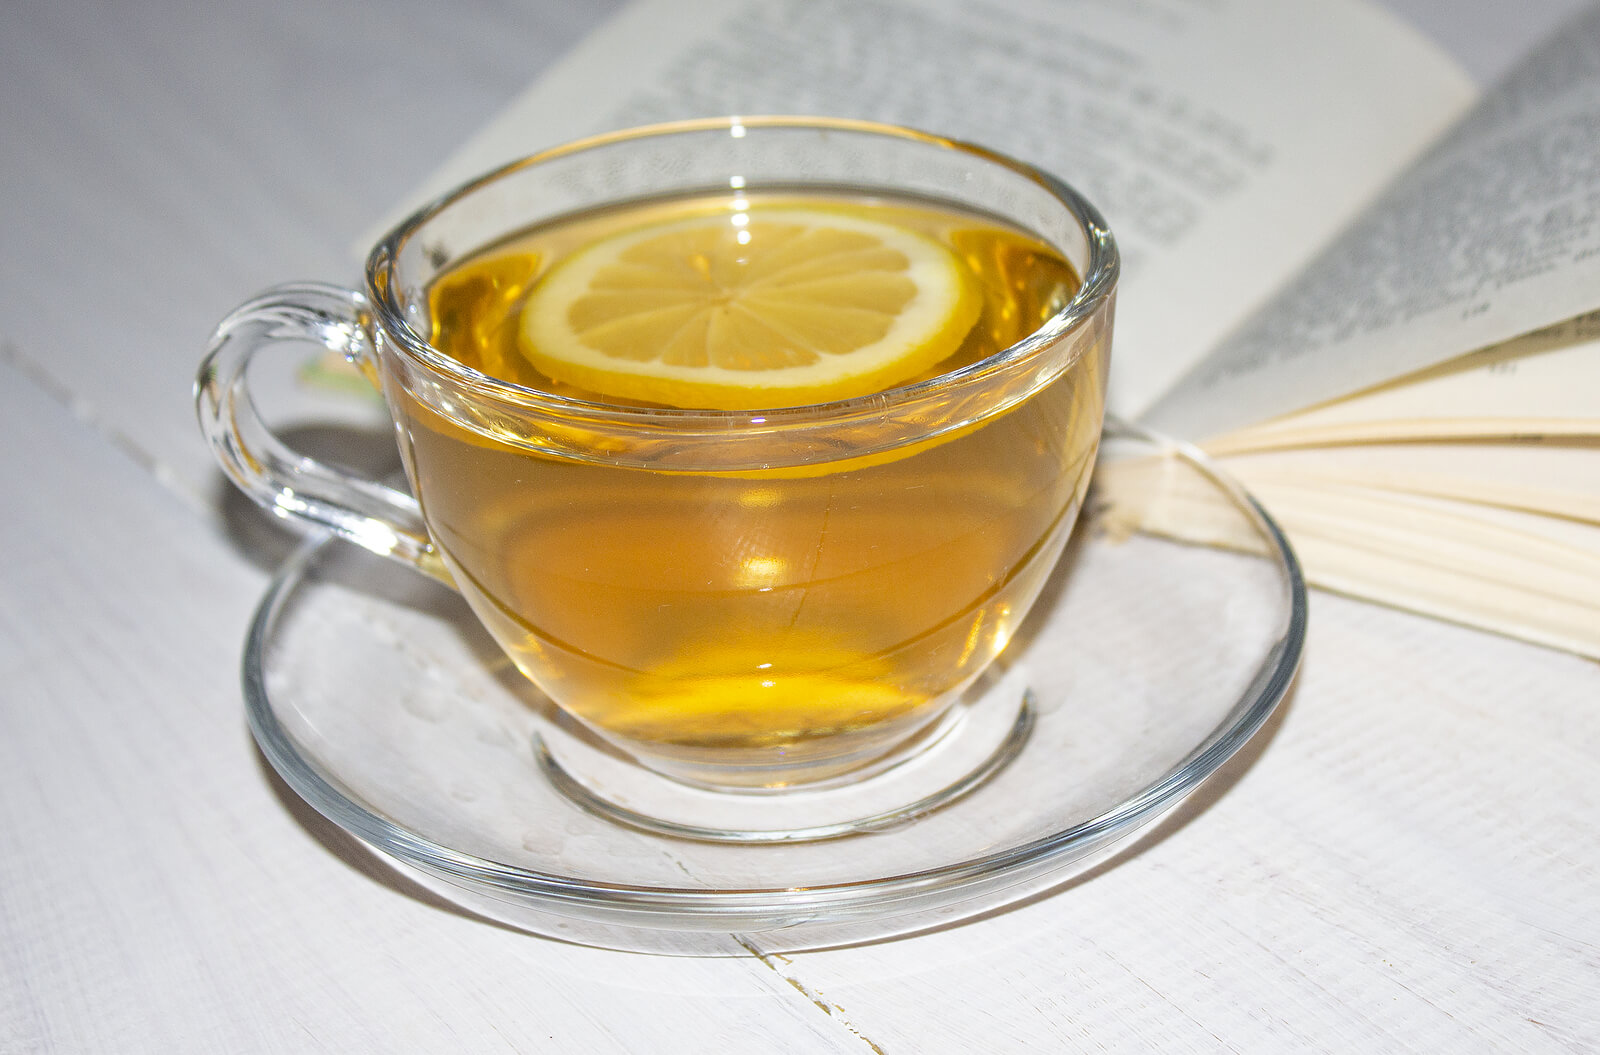 Natural remedies for menopause include tea